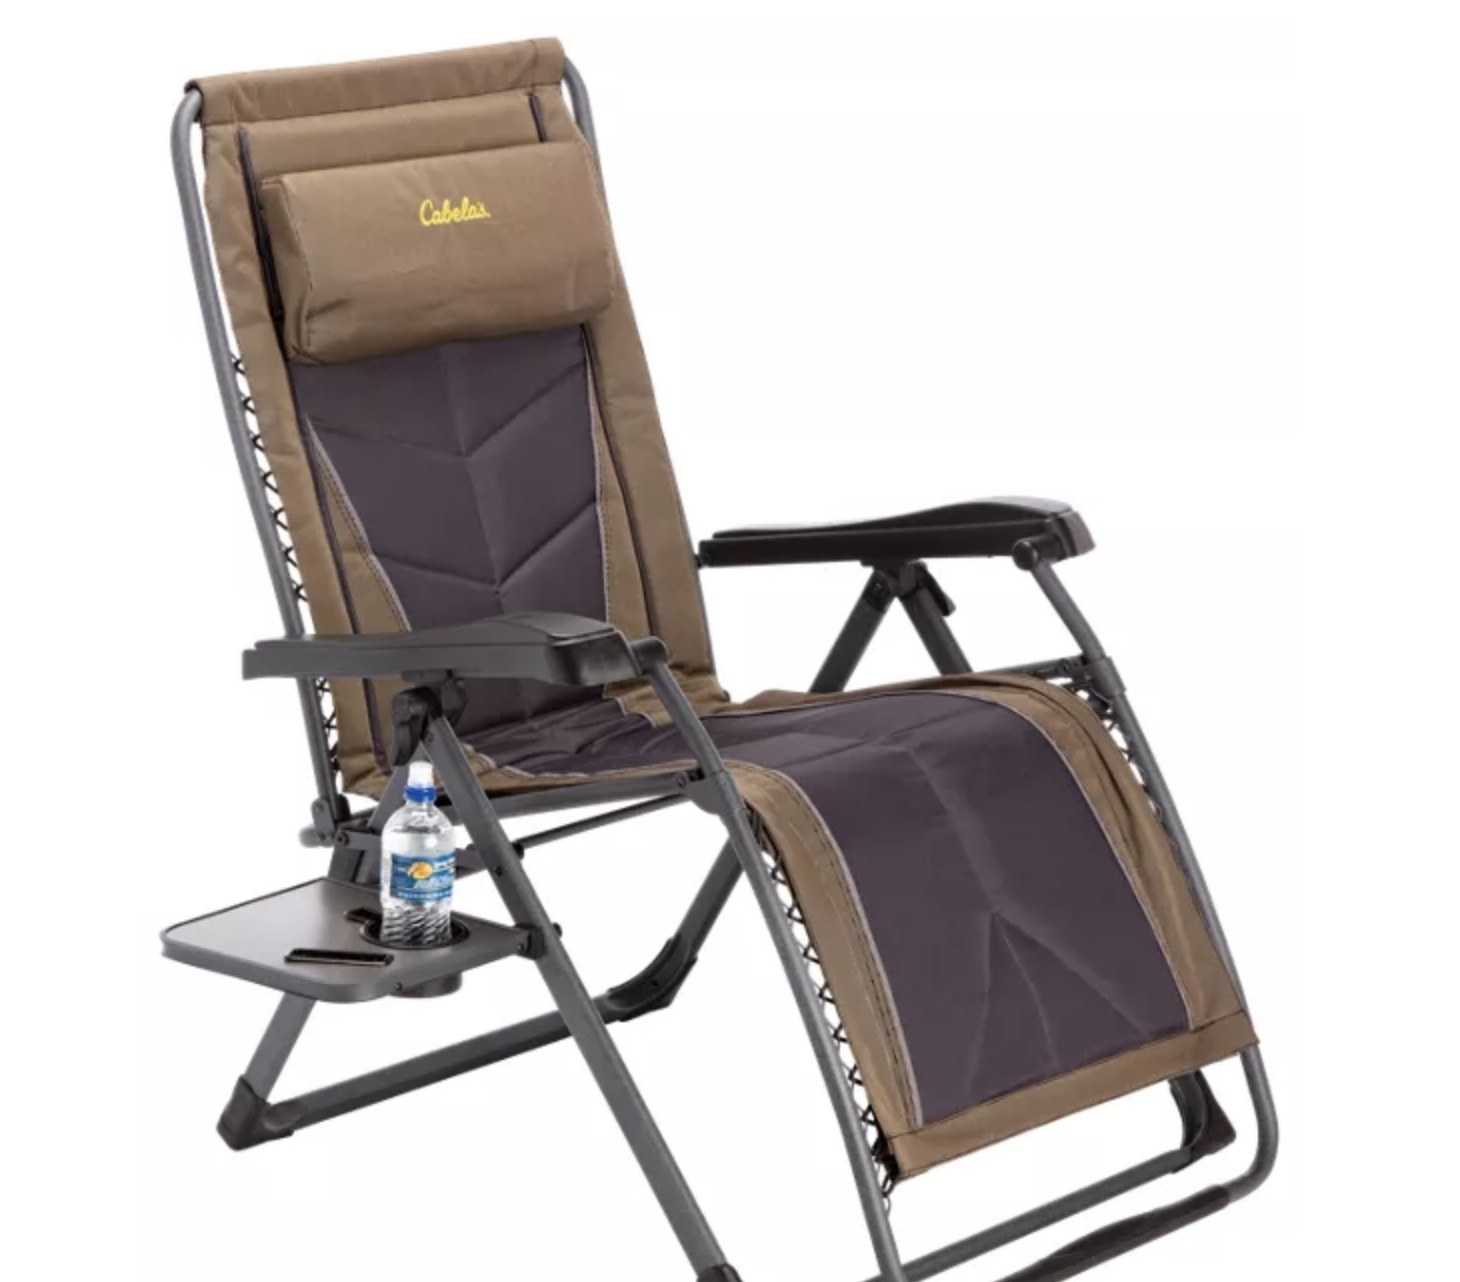 The reclining chair which has a side tray with a cup holder